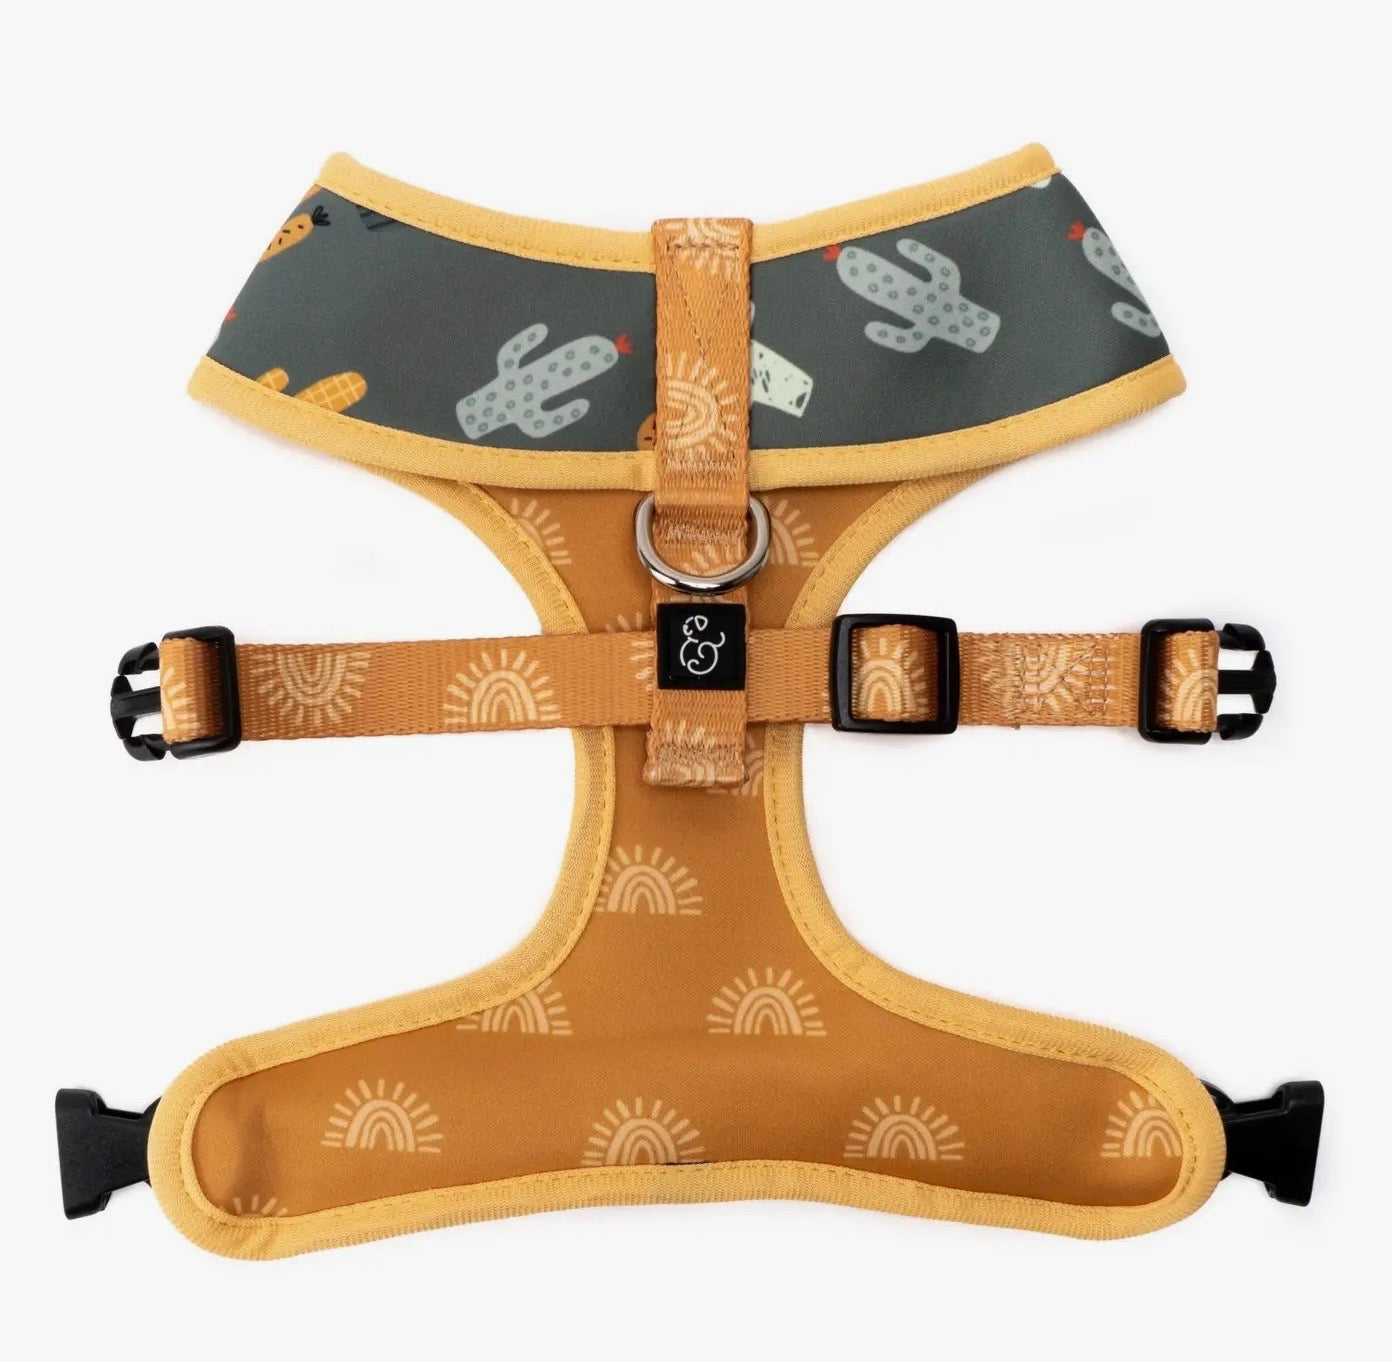 The Looking Sharp Harness